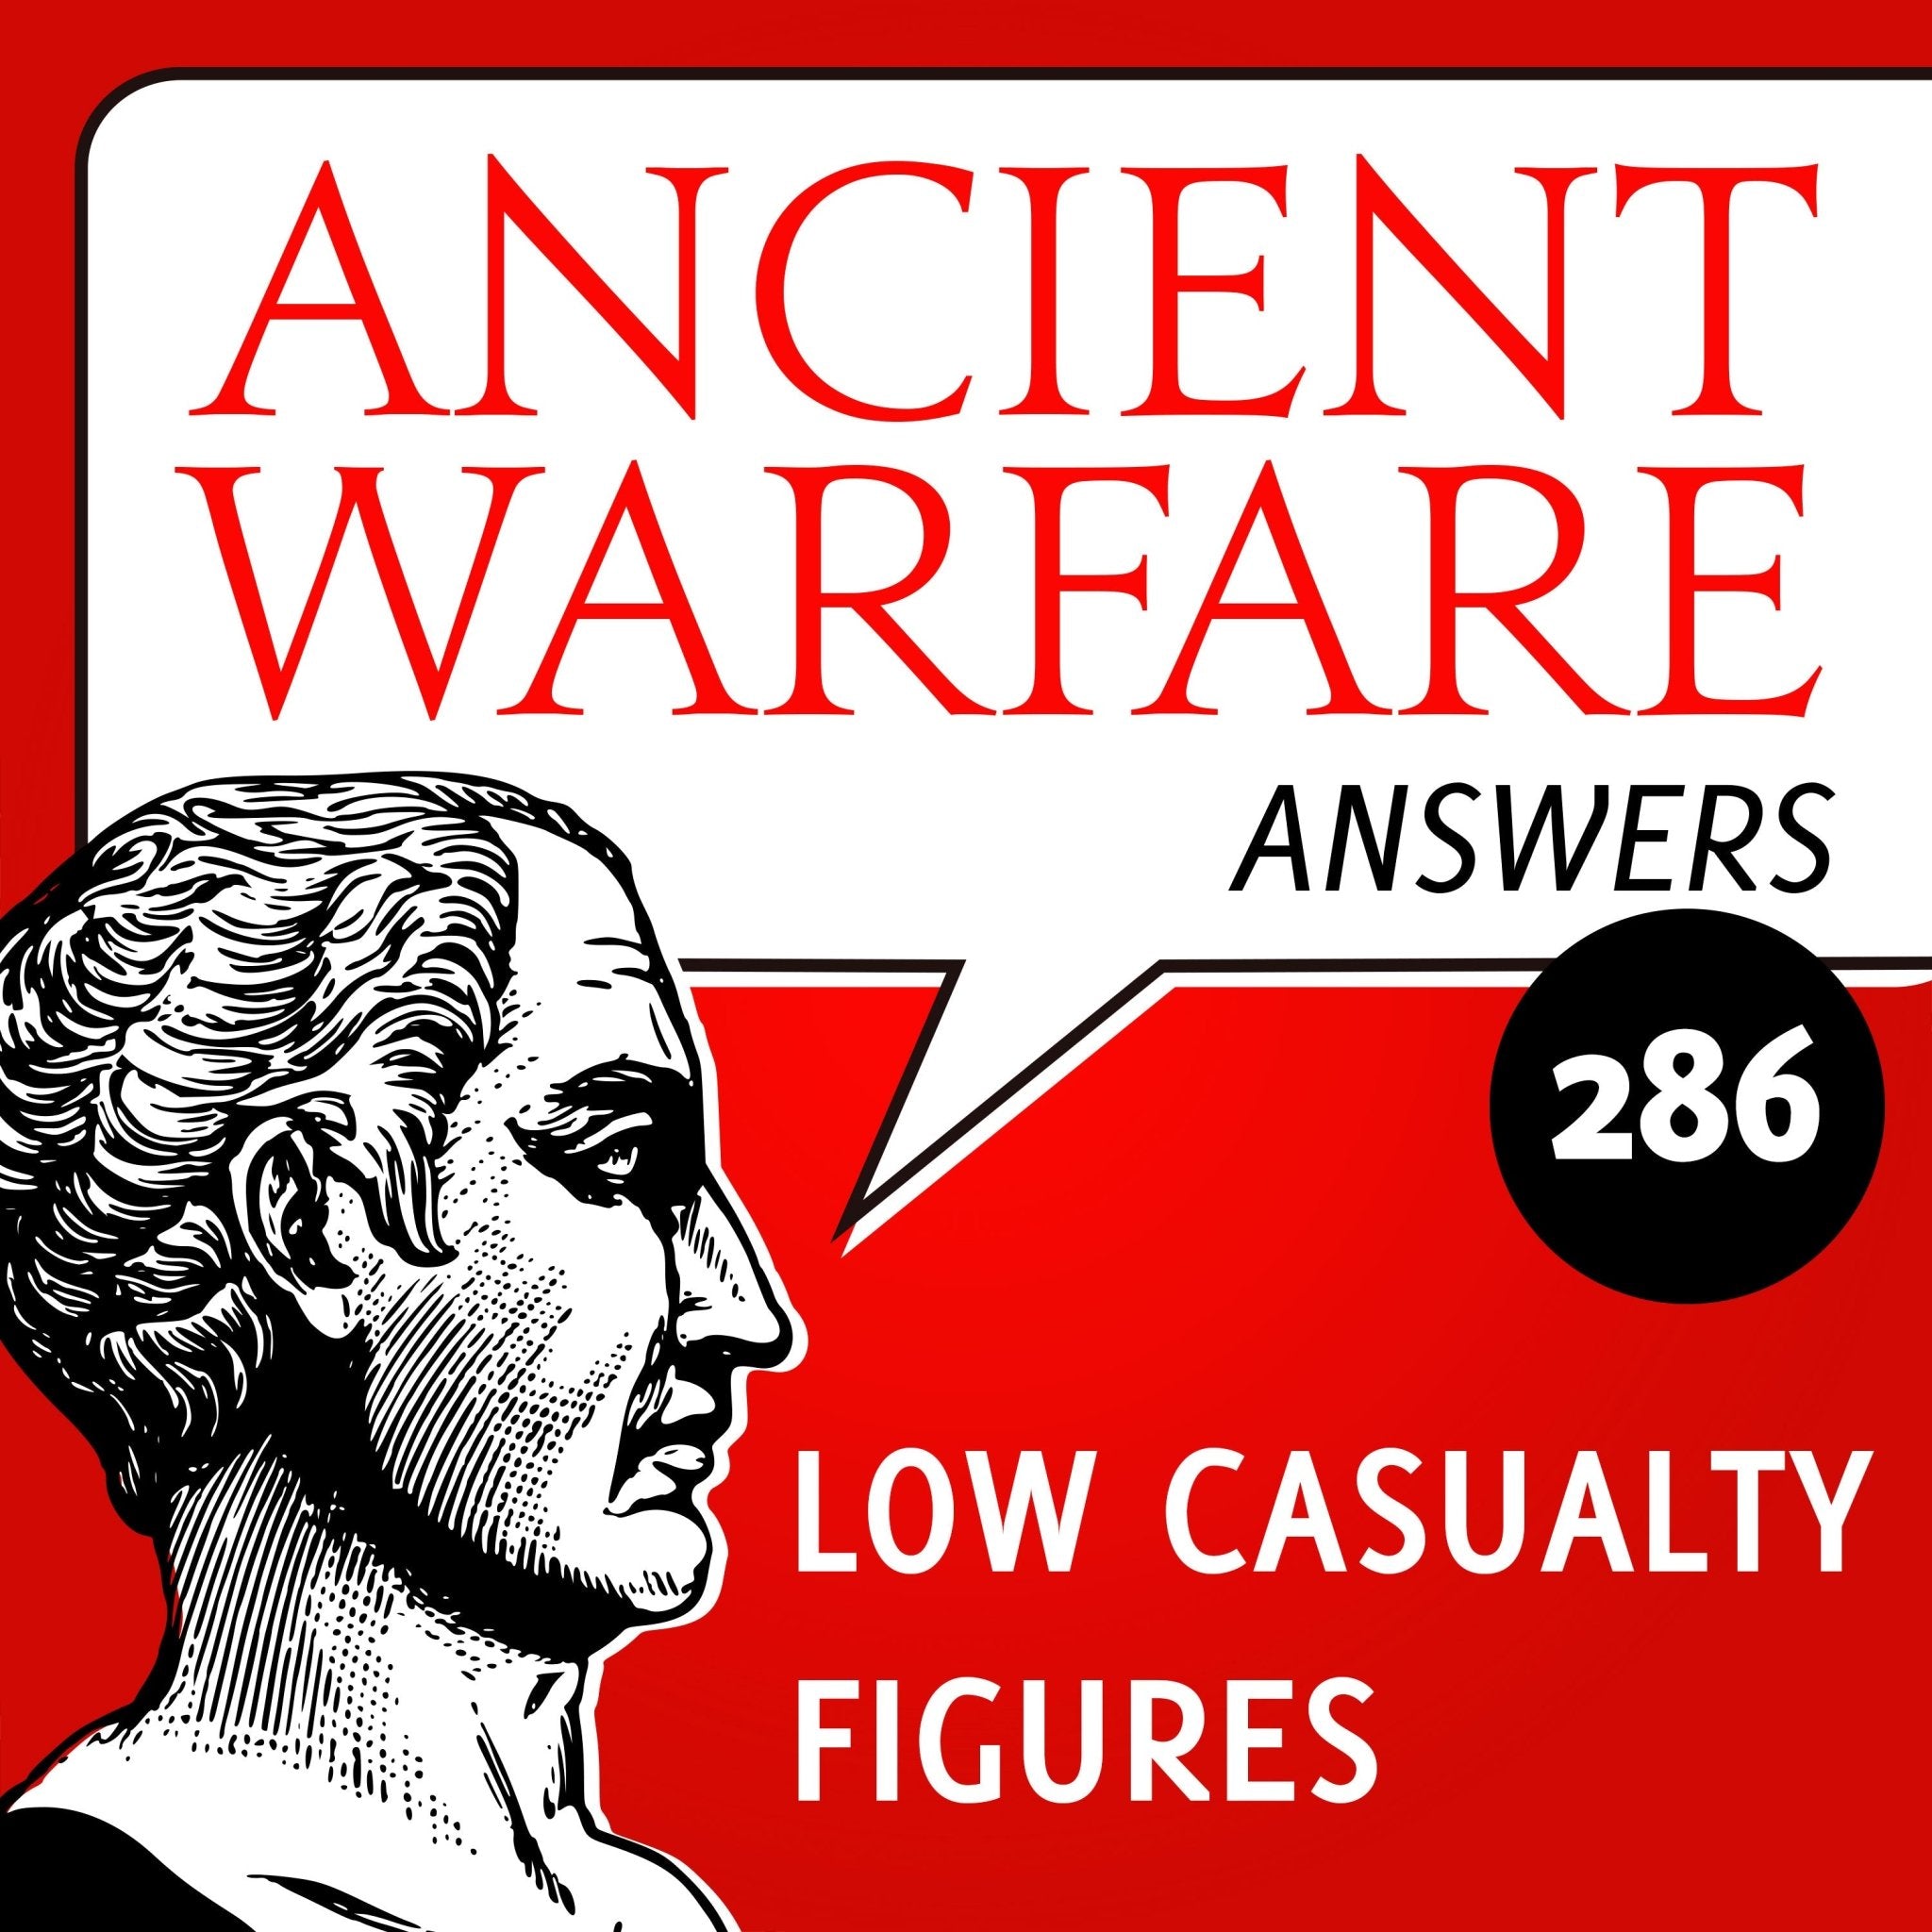 Ancient Warfare Answers (286): Low Casualty figures